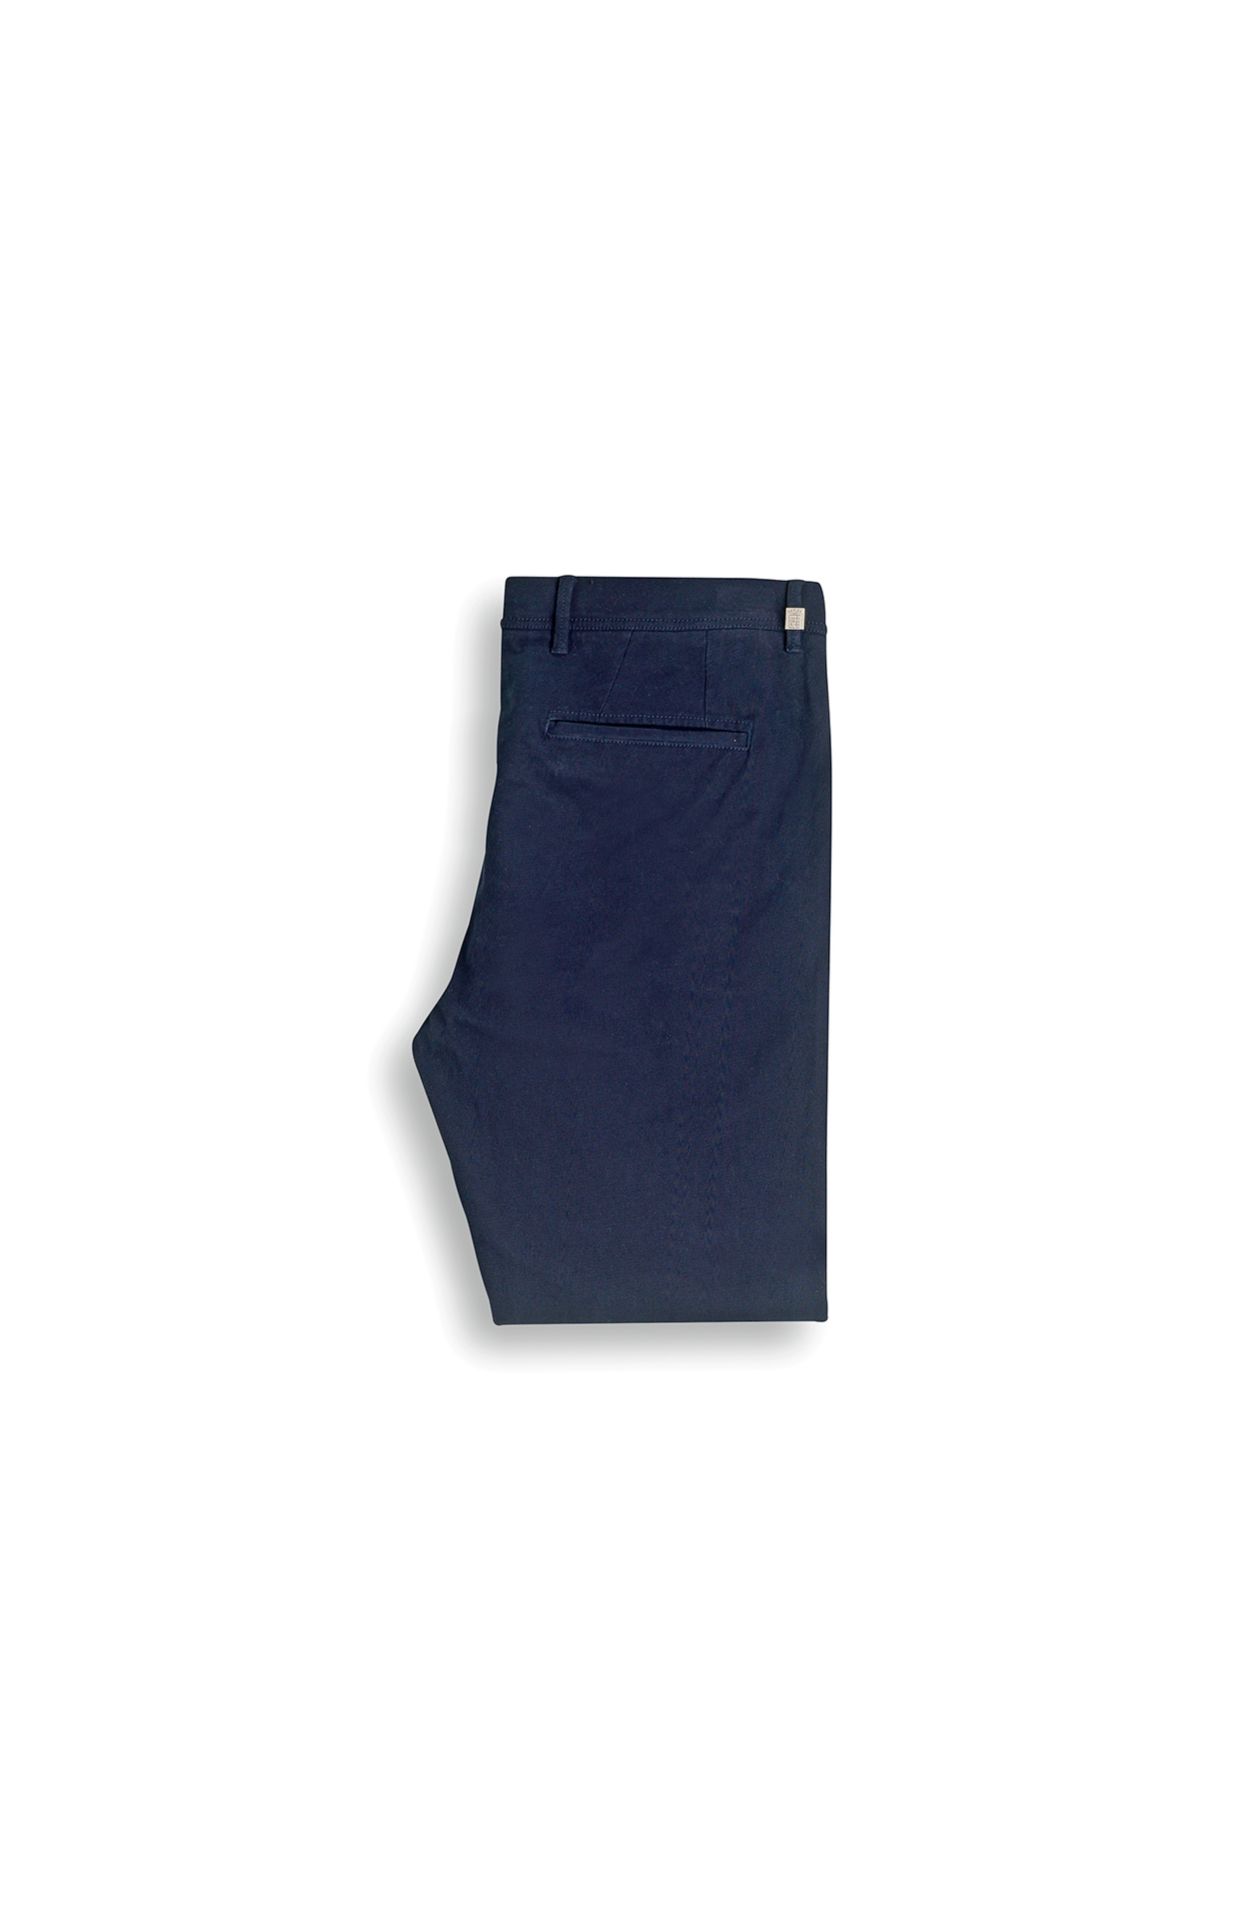 Weekend collection cotton trousers